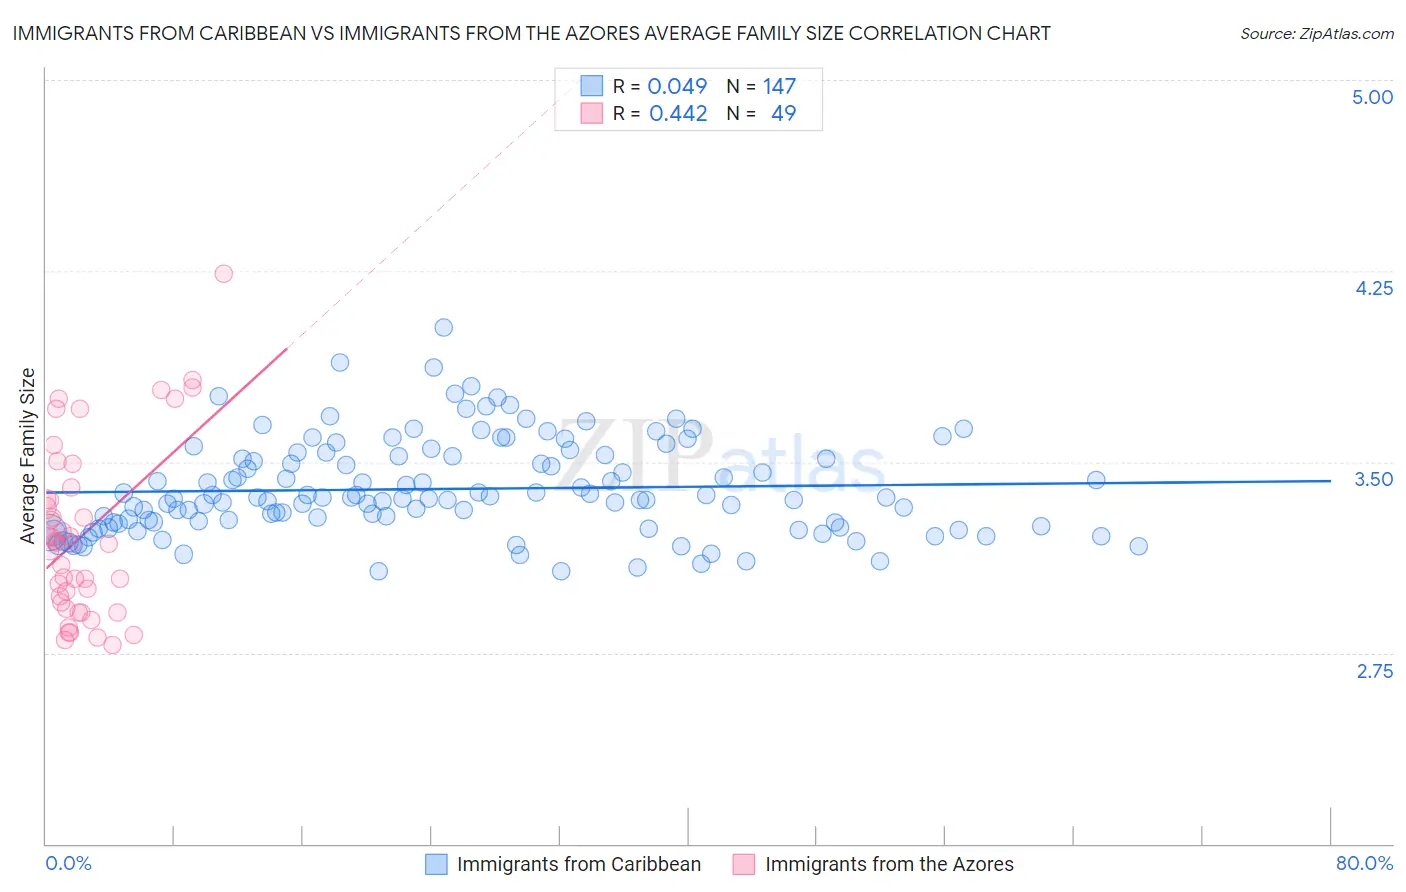 Immigrants from Caribbean vs Immigrants from the Azores Average Family Size